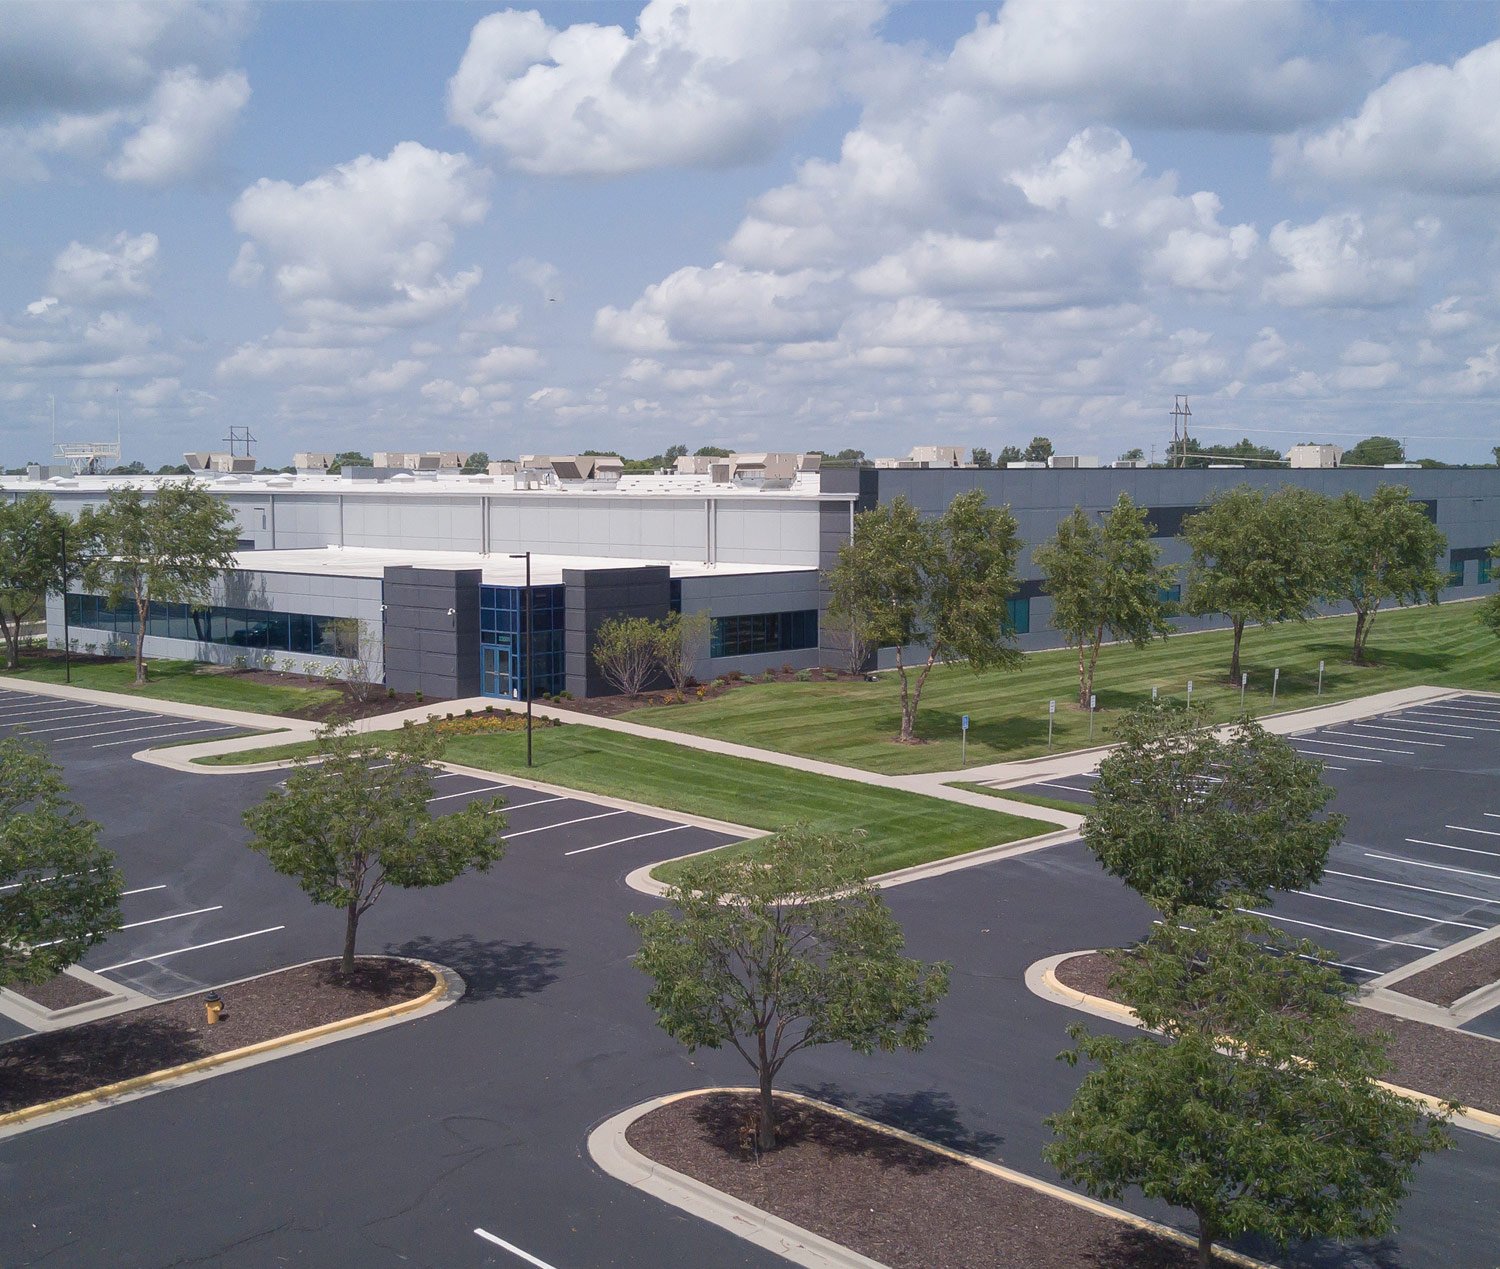 Areal photo of Industrial building in Lenexa KS owned by Chad Williams